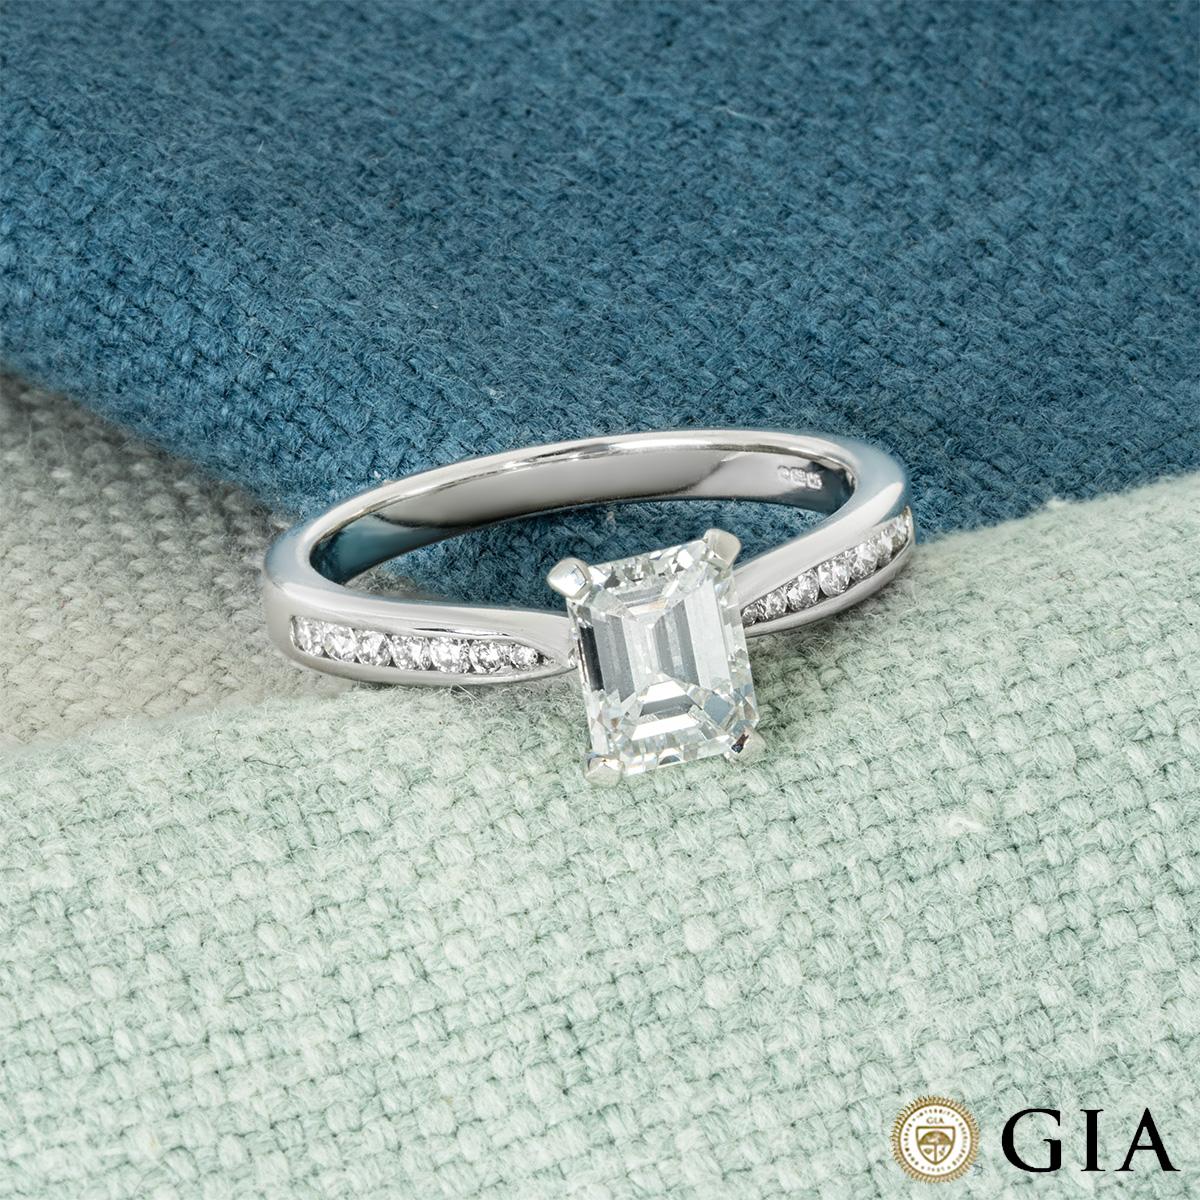 GIA Certified White Gold Emerald Cut Diamond Engagement Ring 0.95ct D/VS1 For Sale 3